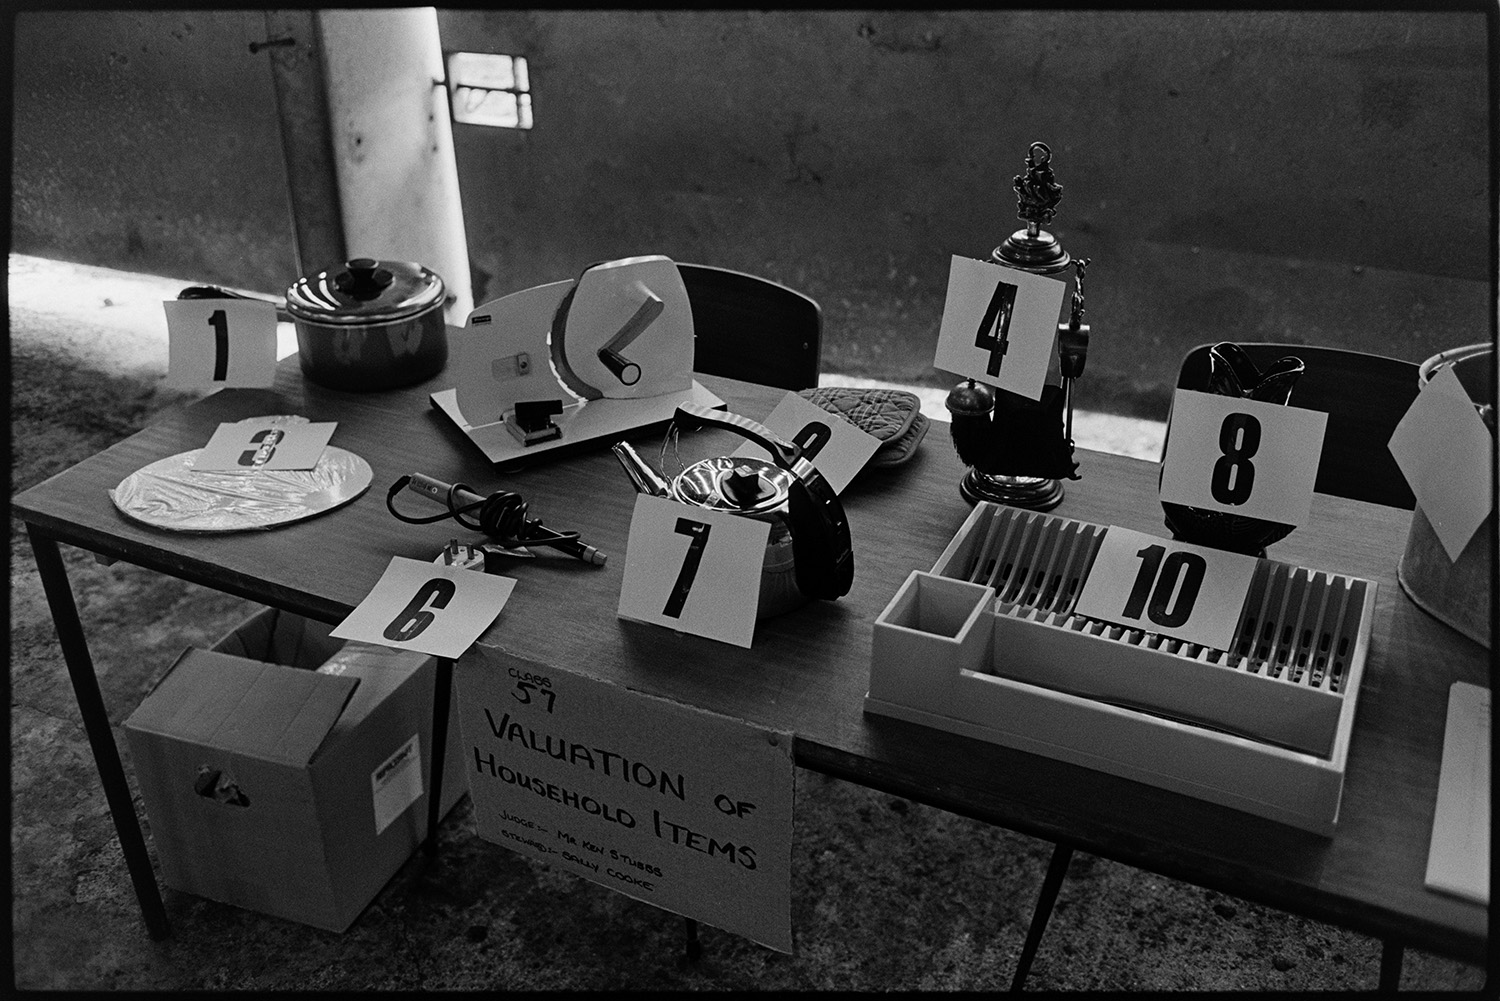 Produce at show, cakes and competitions.
[A 'Valuation of household items' stall at Hatherleigh Show.]